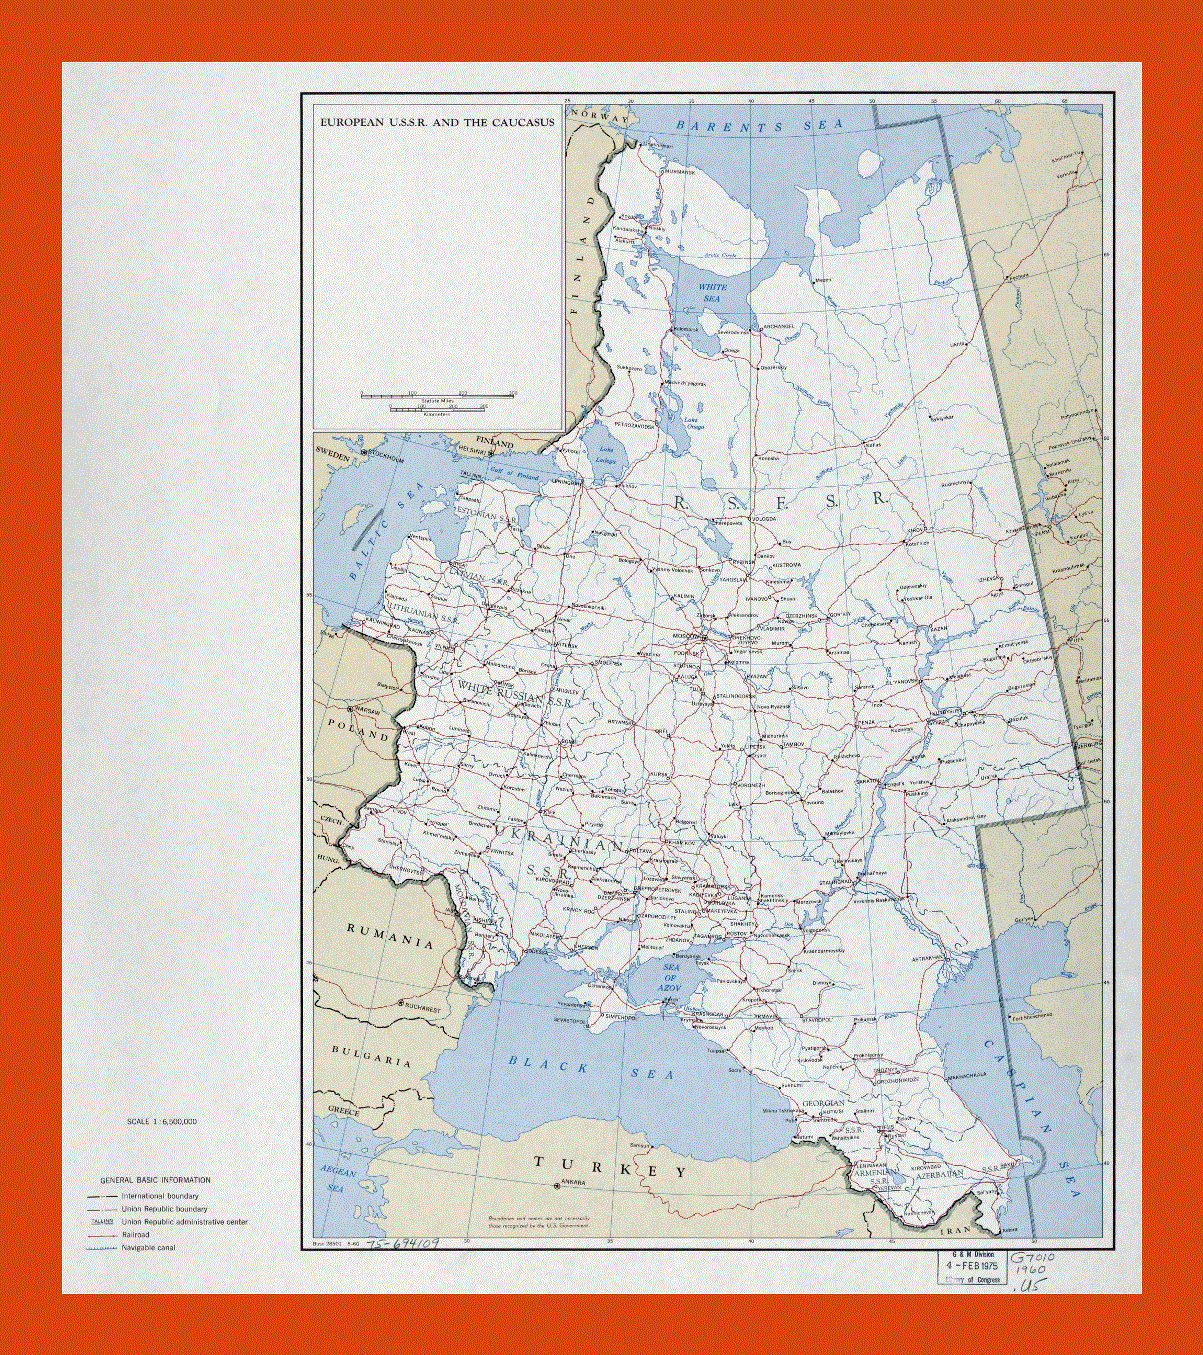 Political and administrative map of European U.S.S.R. and the Caucasus - 1960